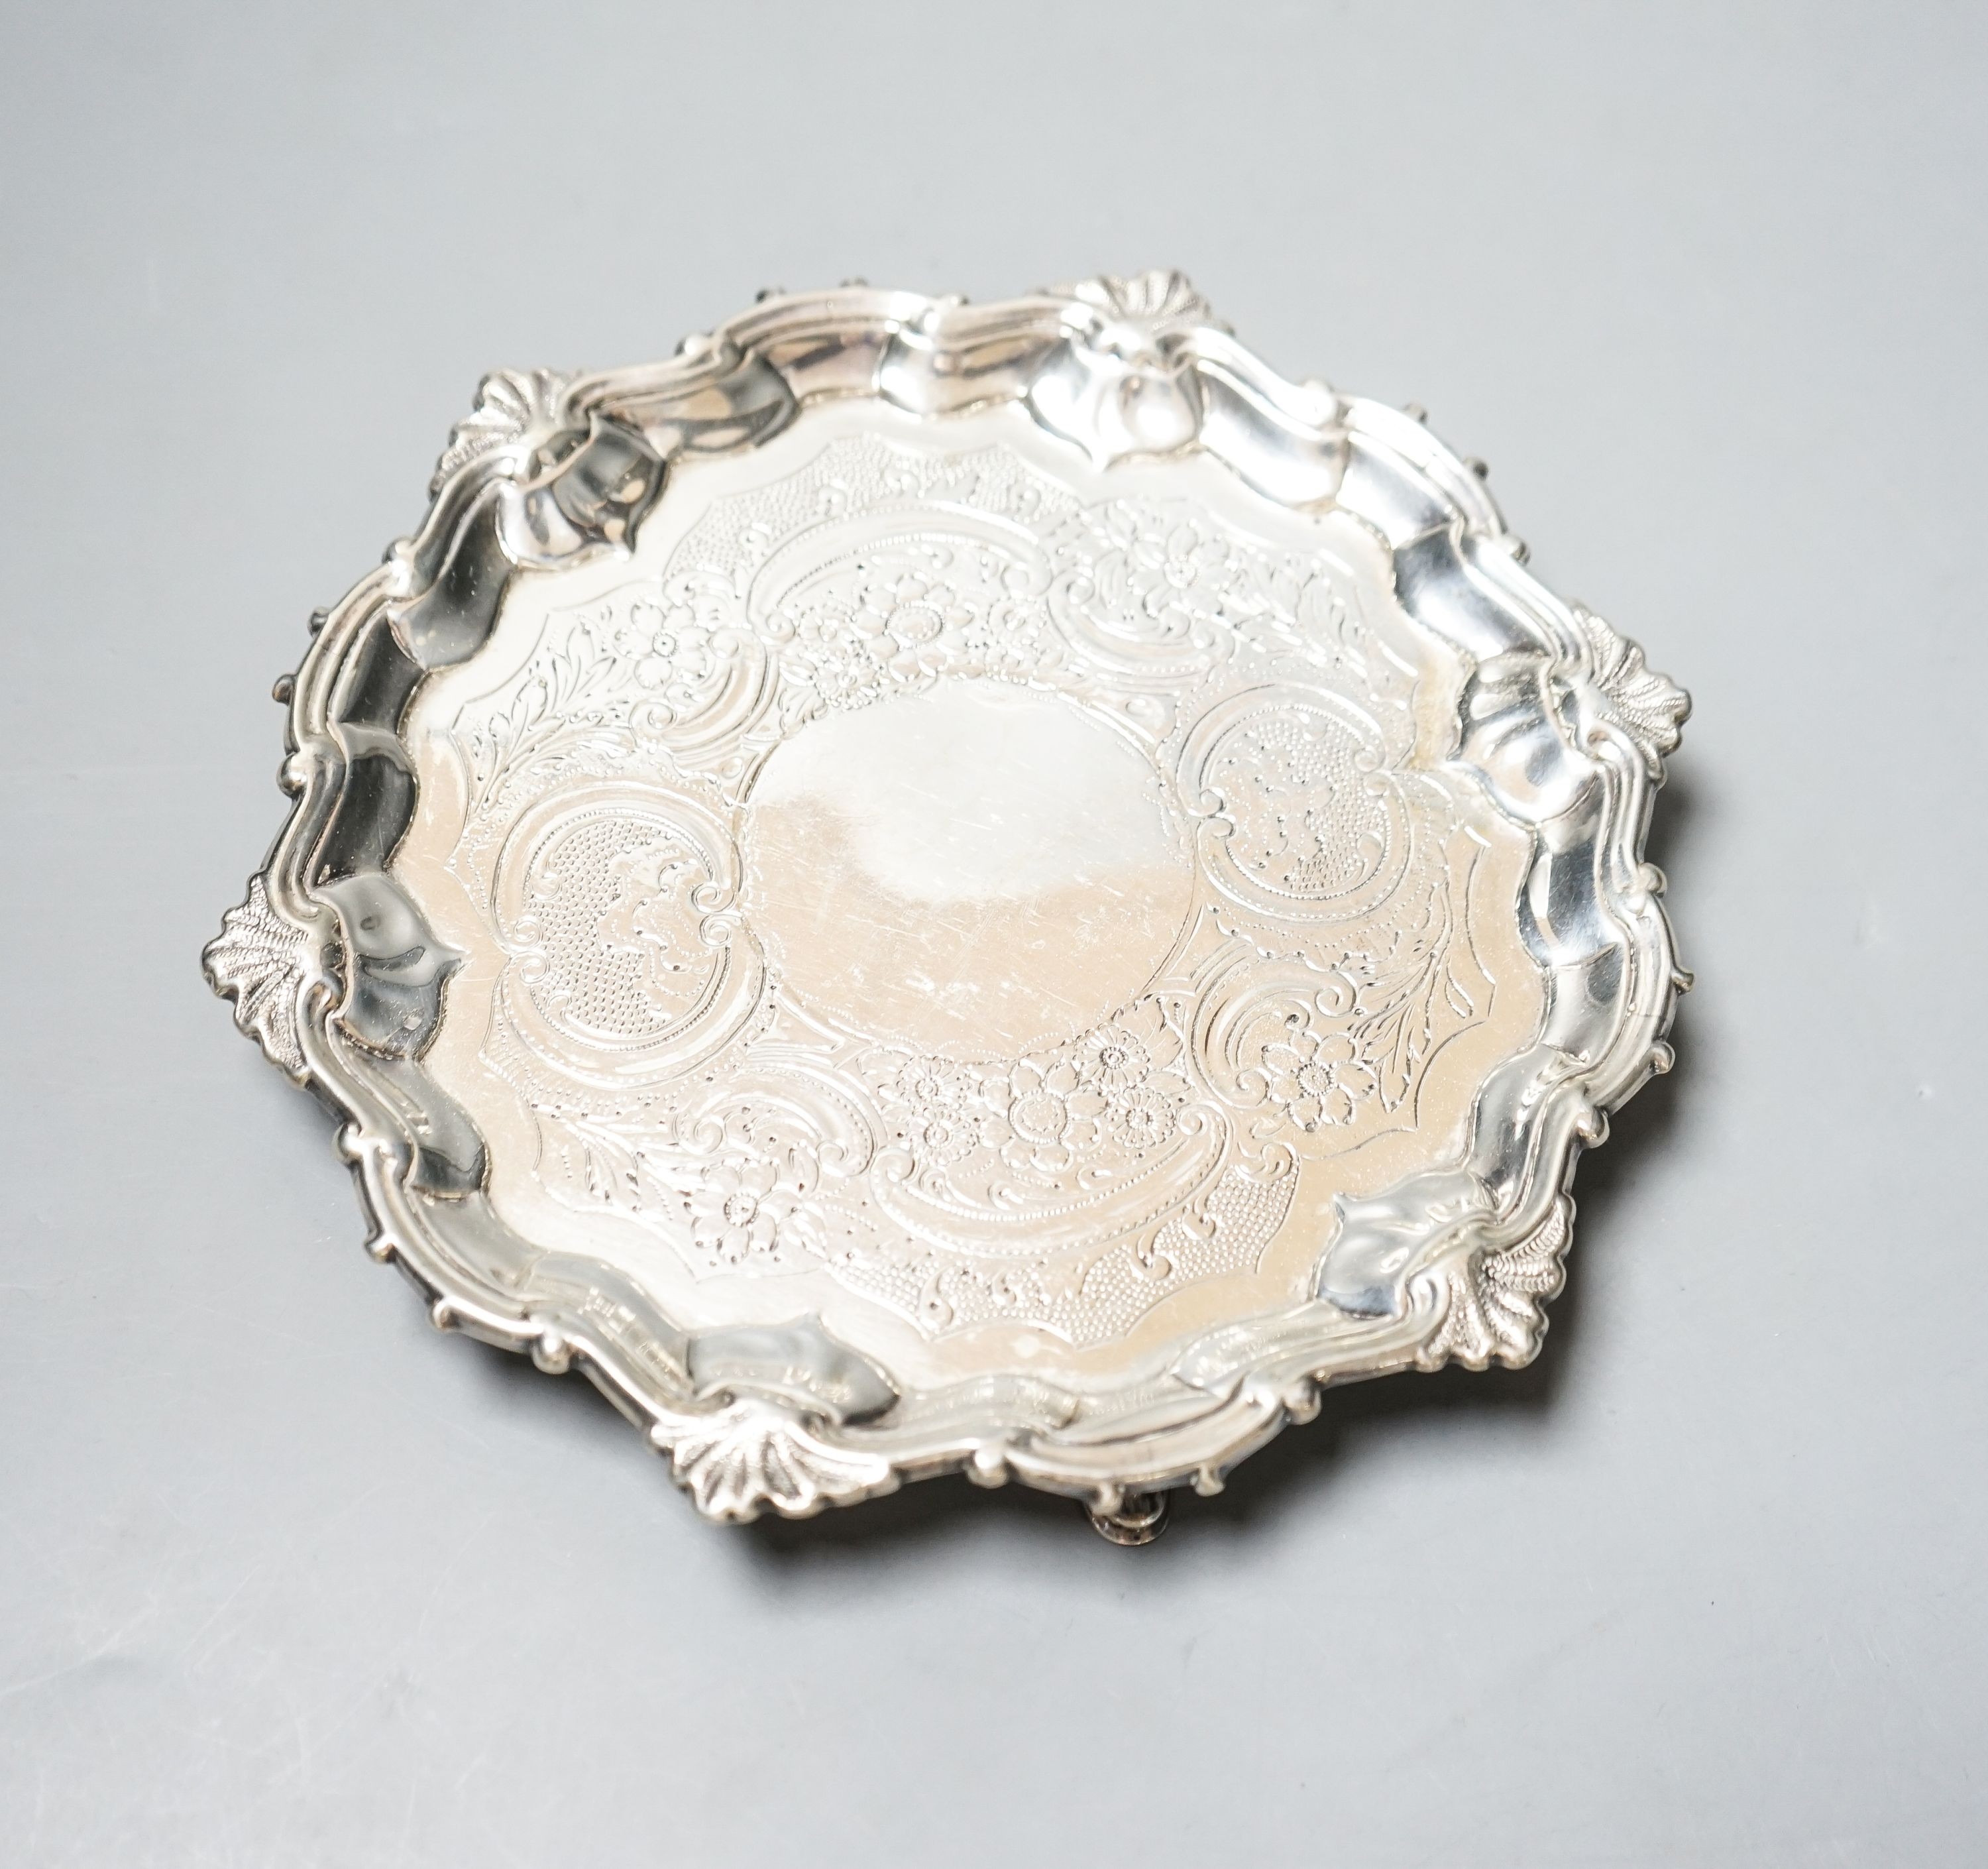 A George II silver waiter, with later engraved decoration, William Grundy, London, 1751, 18.6cm, 8oz (a.f.).